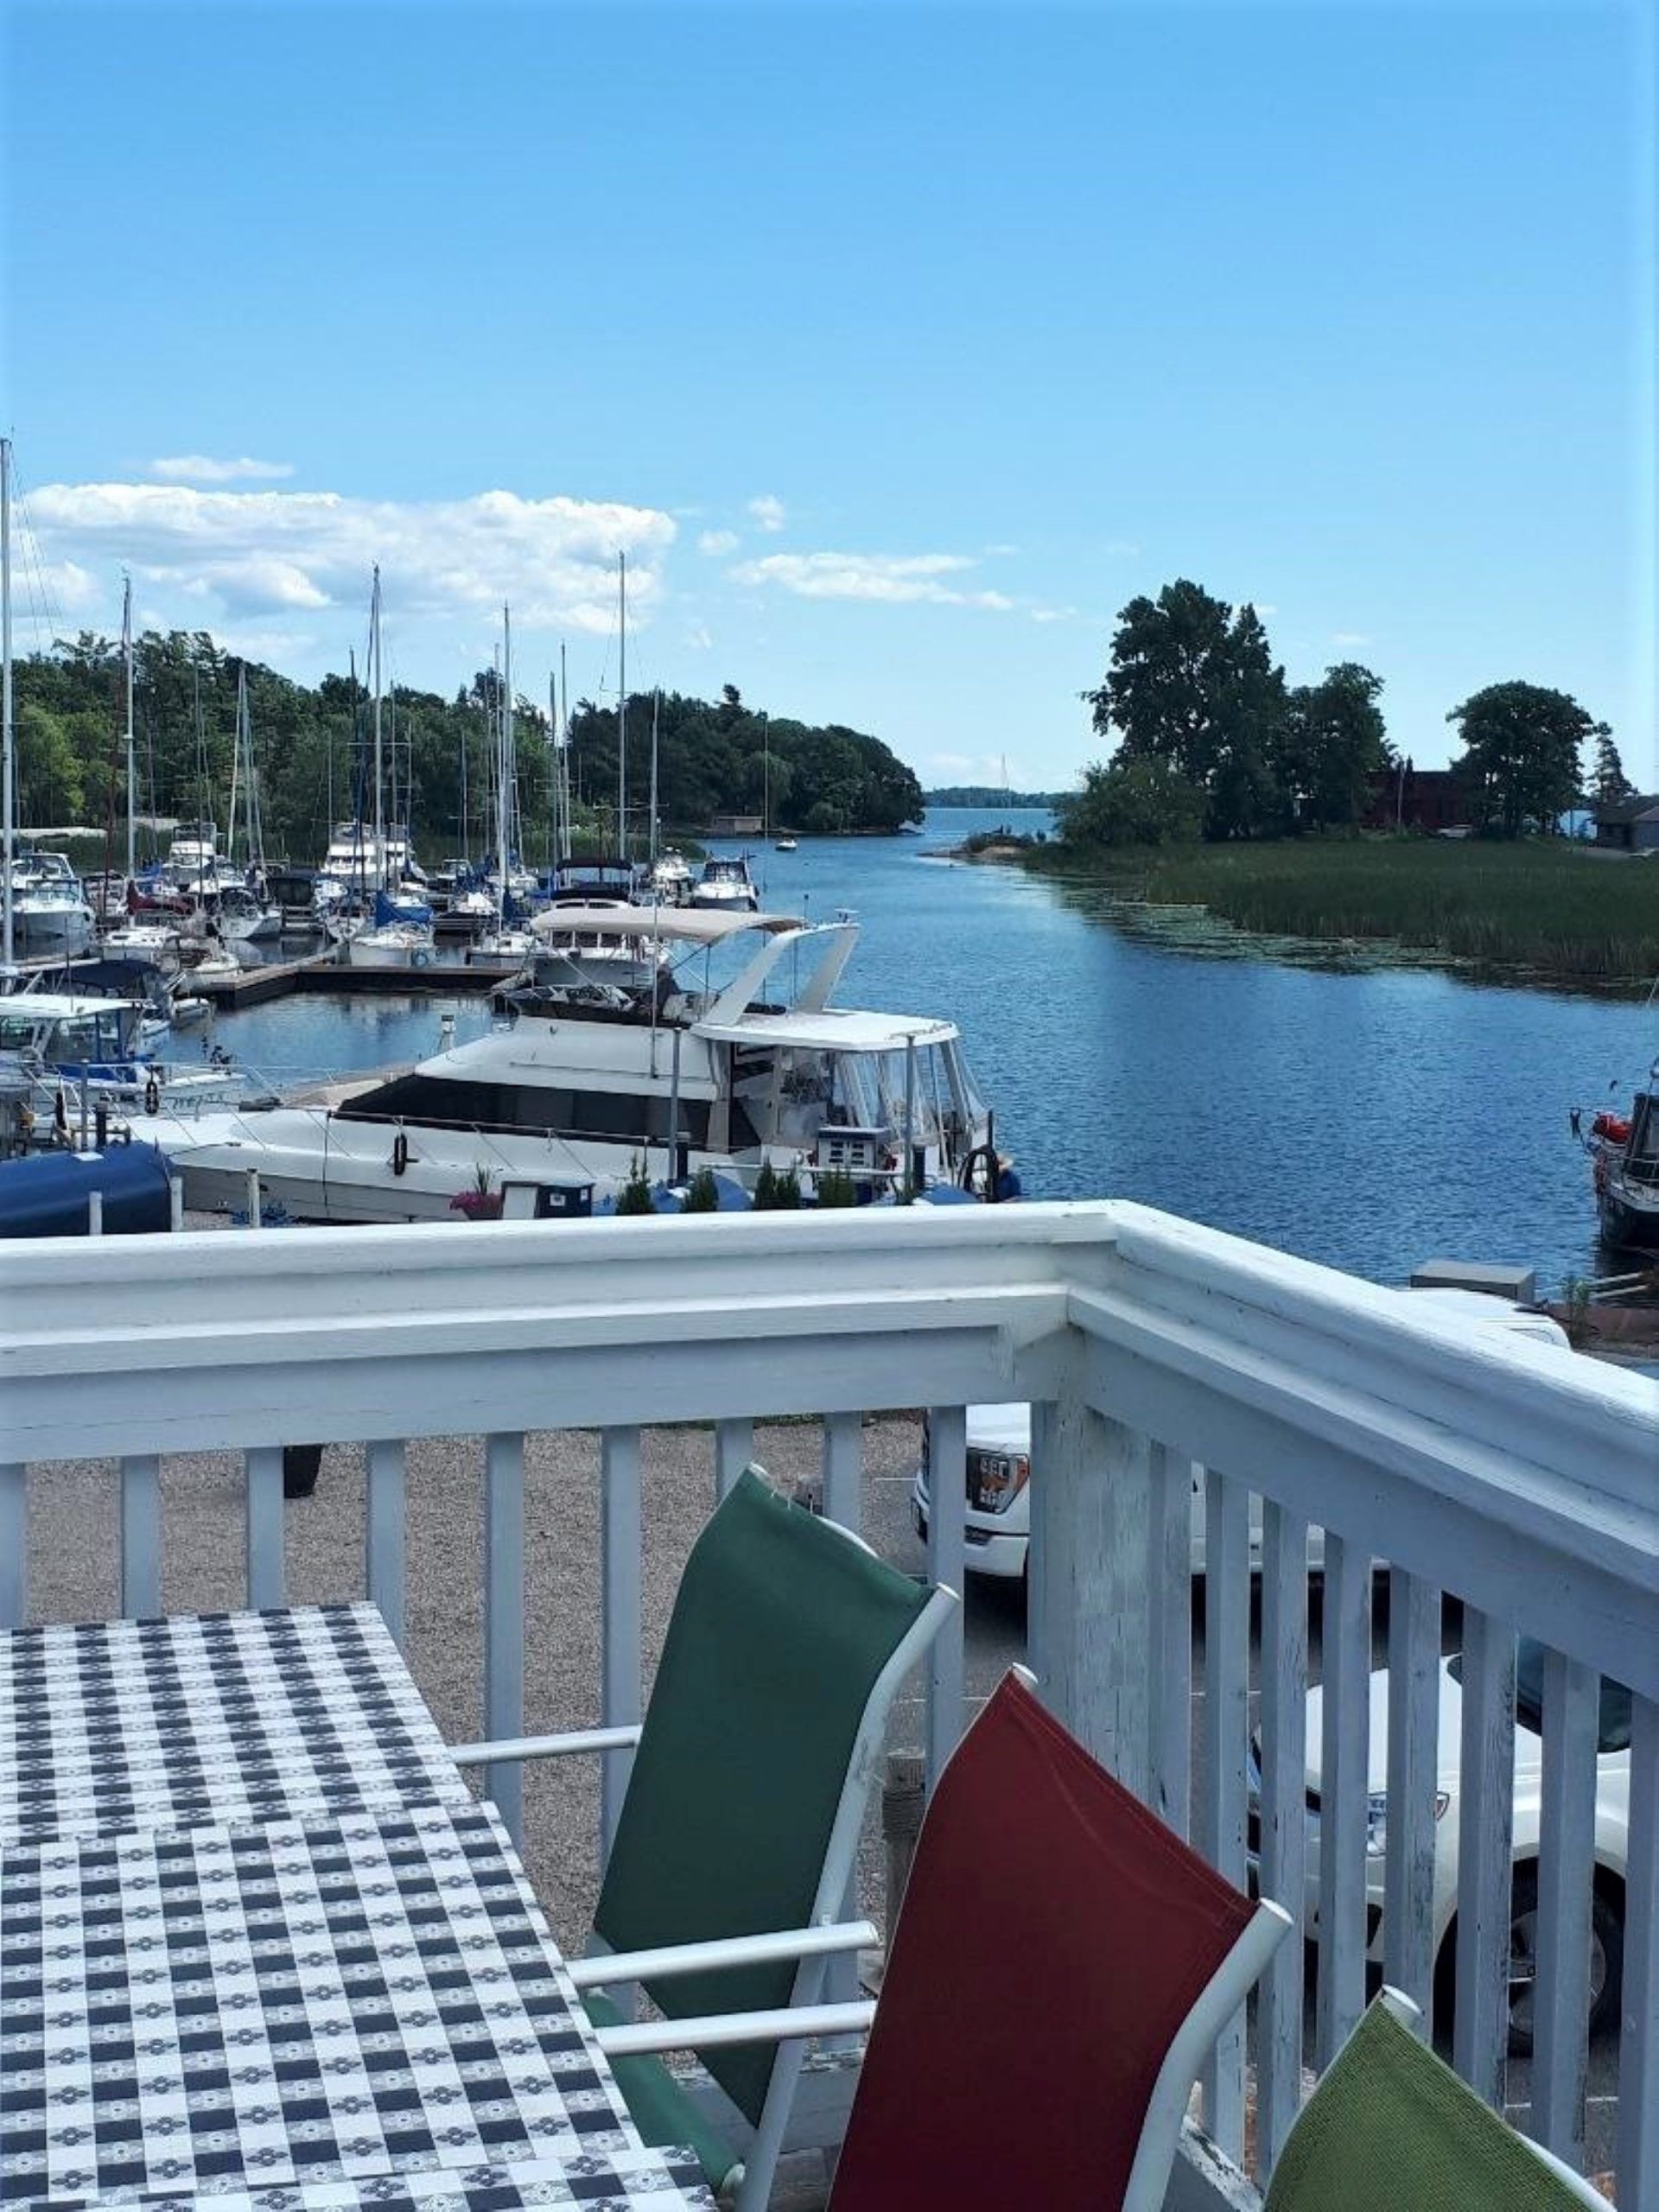 Born in the Pandemic: The Cove Waterfront Grill